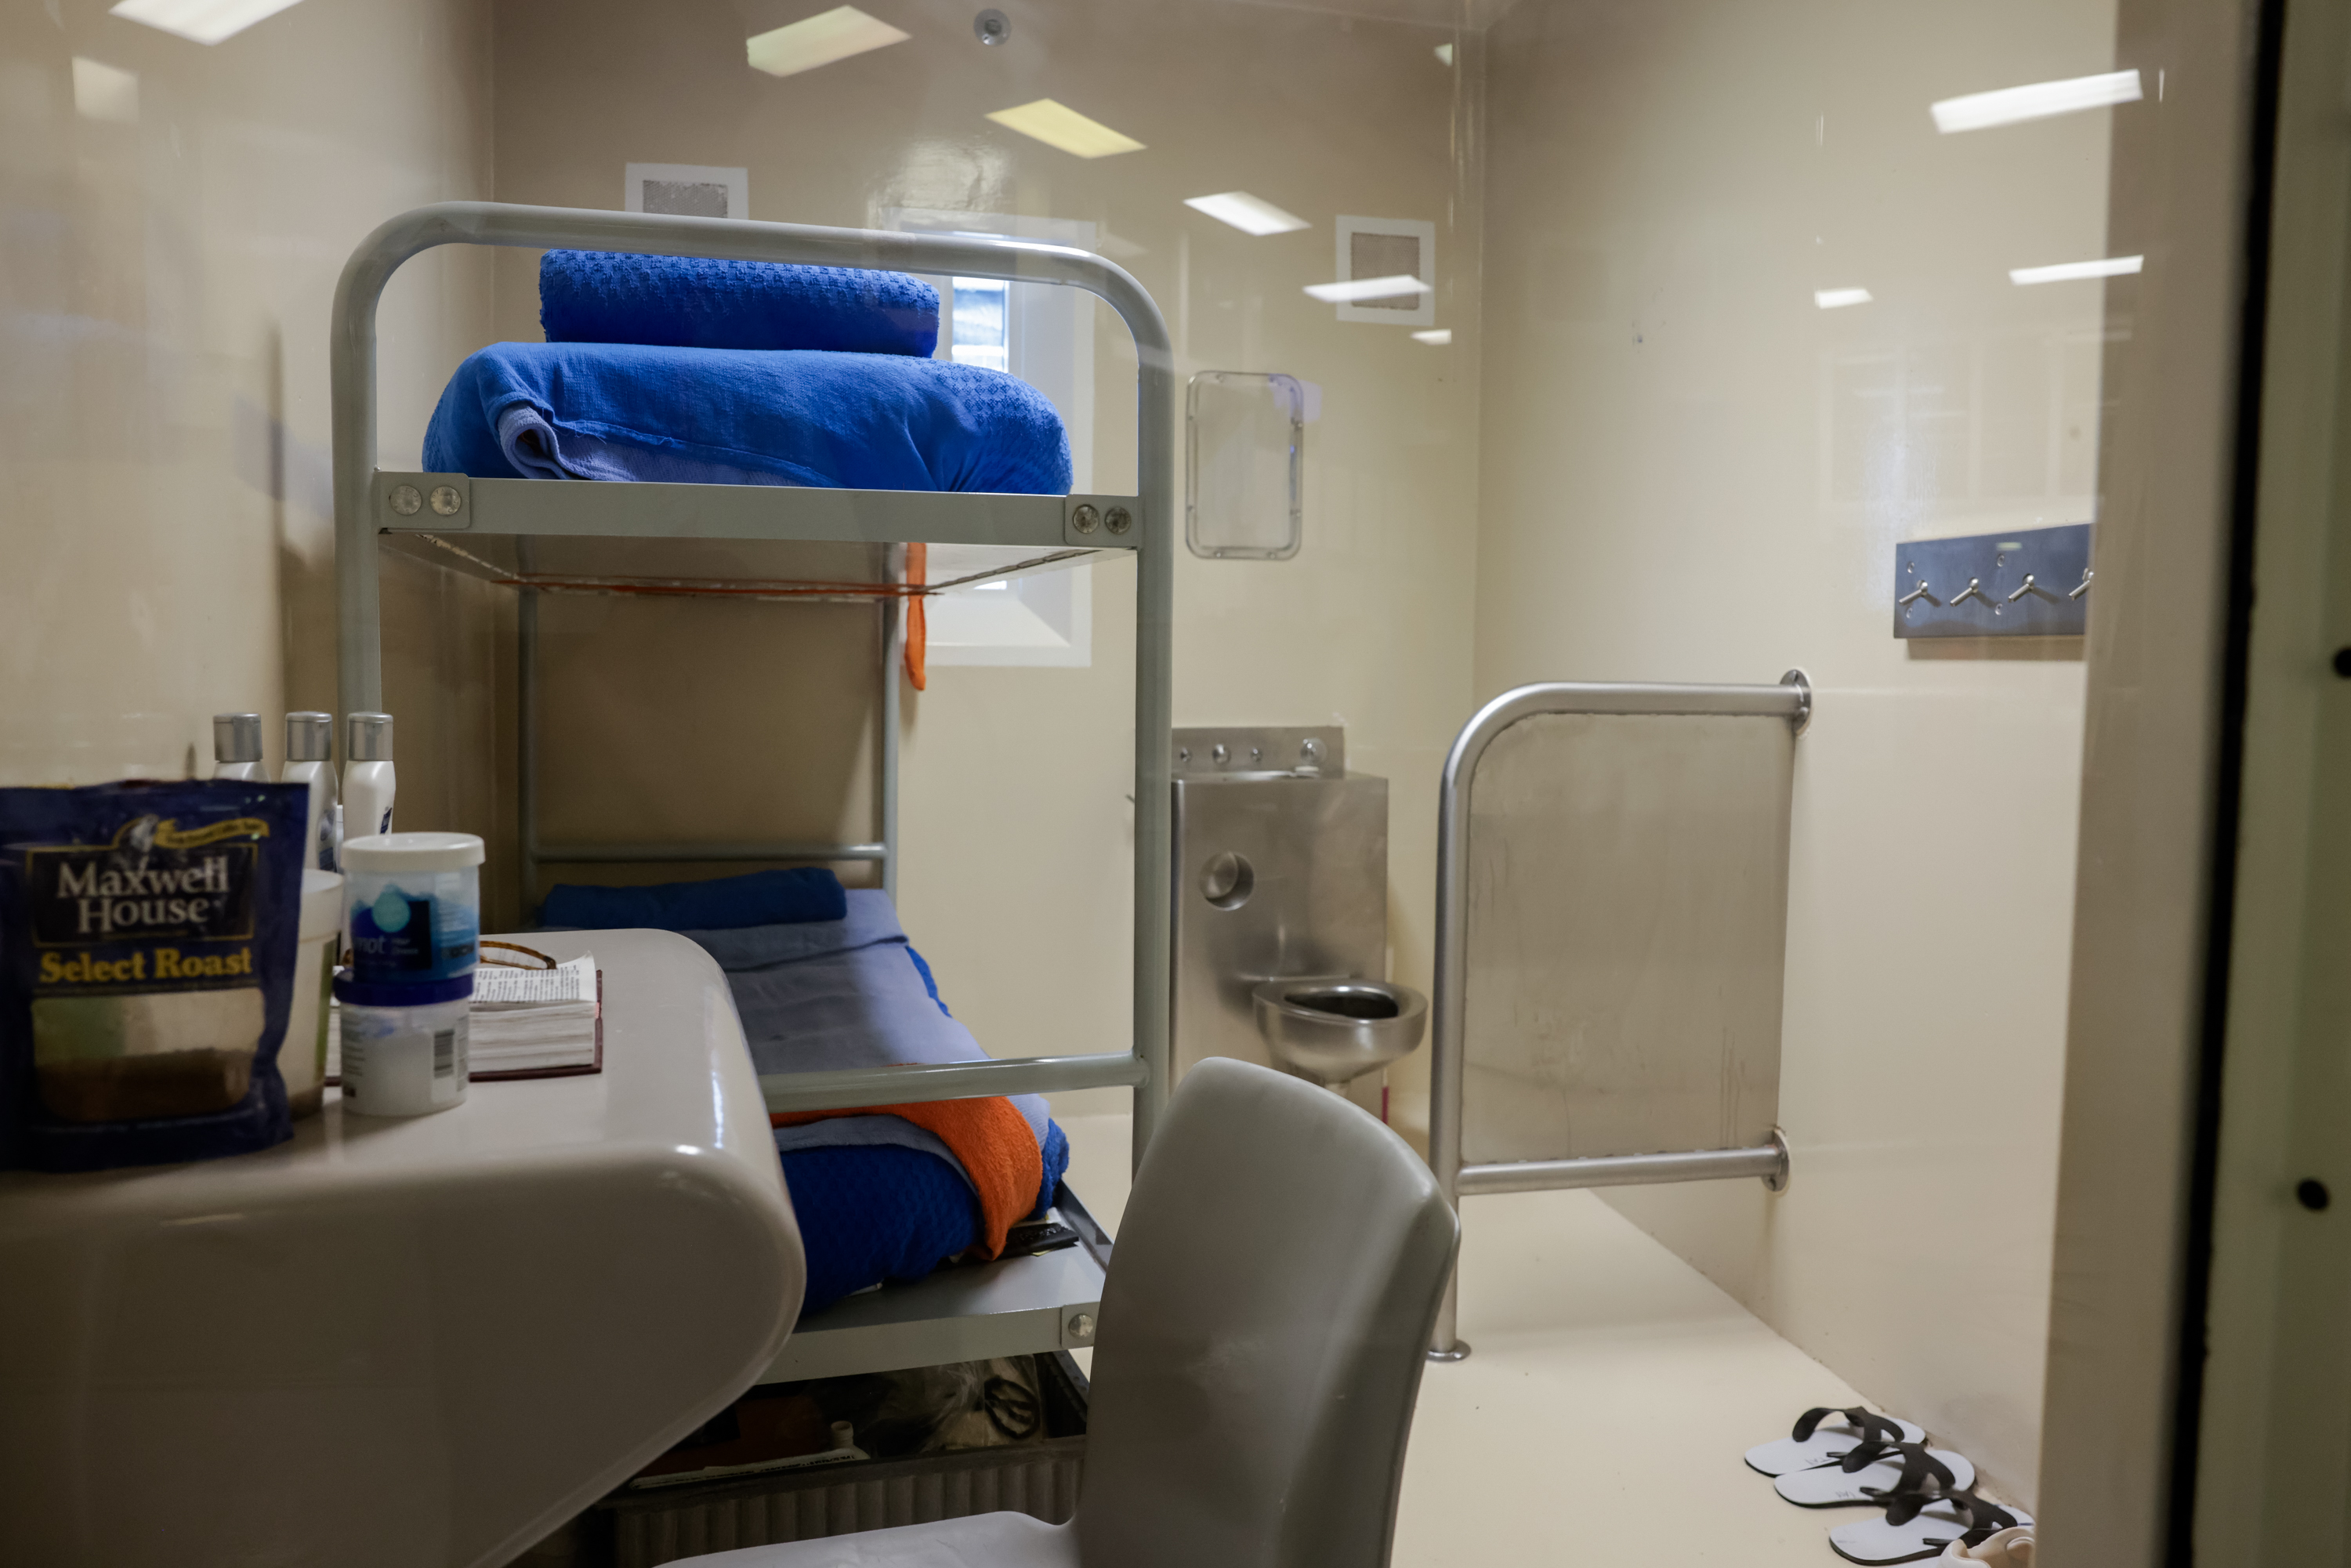 The setting is inside a jail cell which contains two empty beds, a desk, and a toilet.